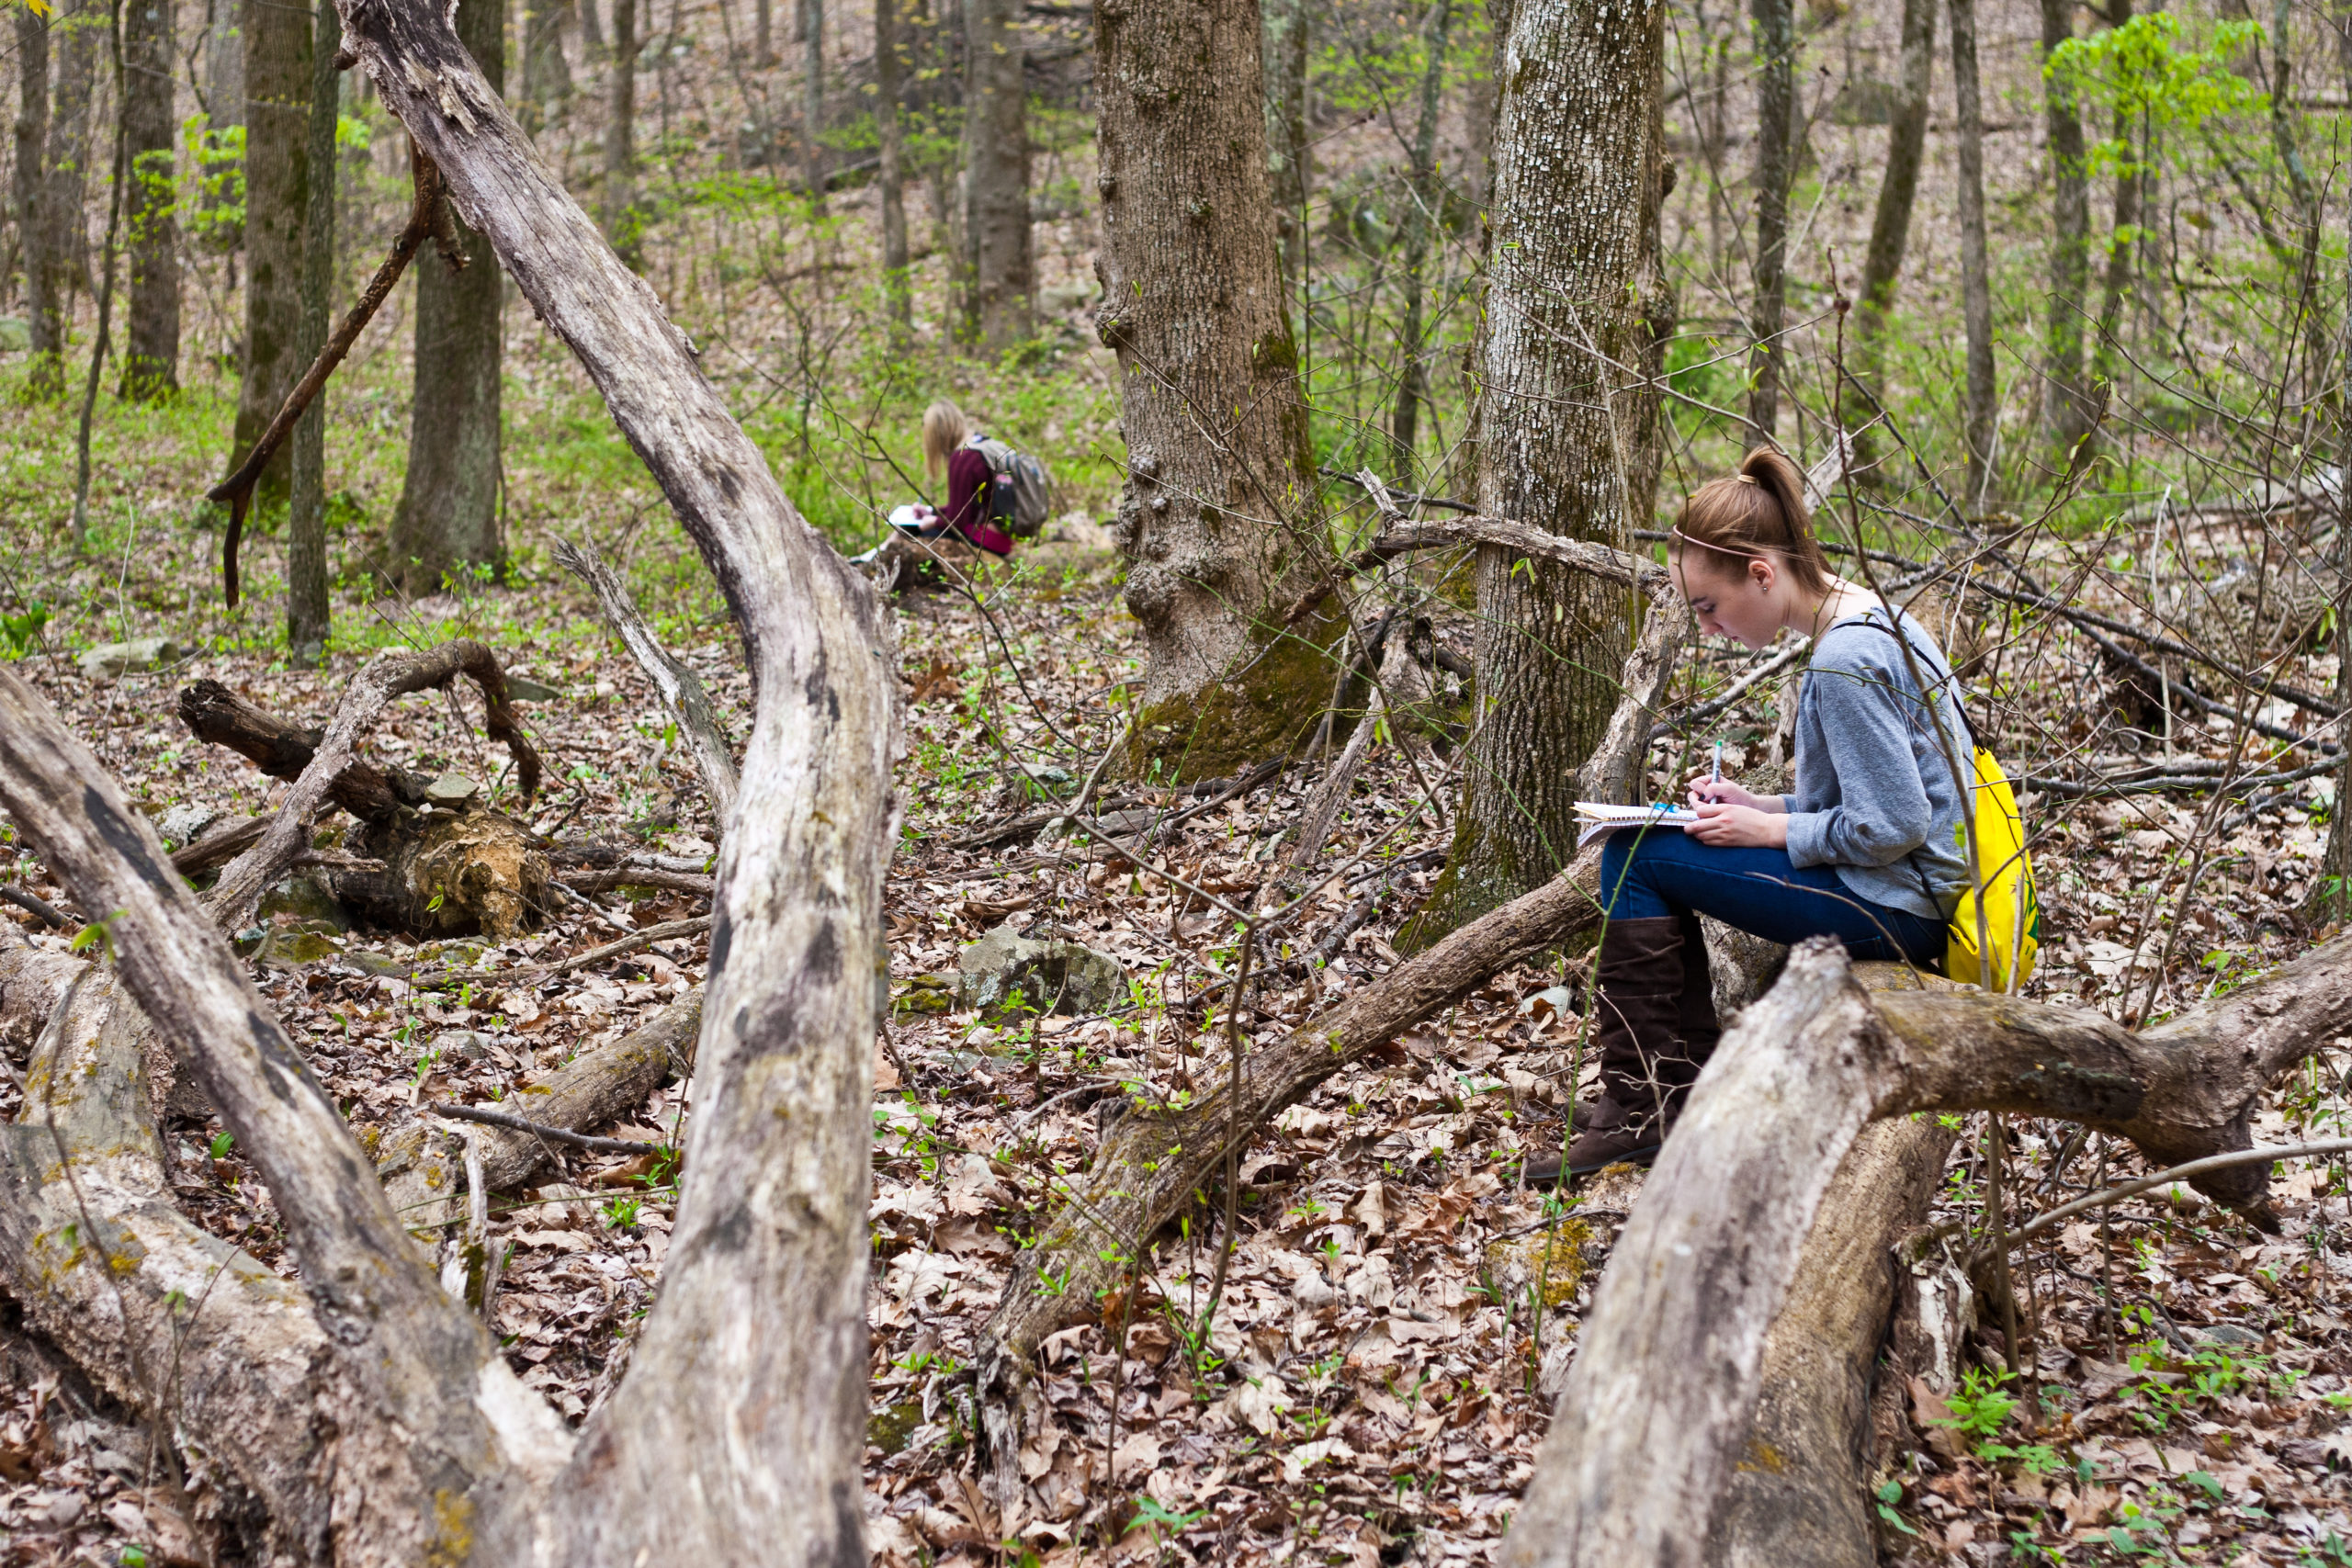 Freshmen Cornerstones students take part in field tirp to Mason's Environmental Studies on the Piedmont, where they observed nature and took field notes on their observations.